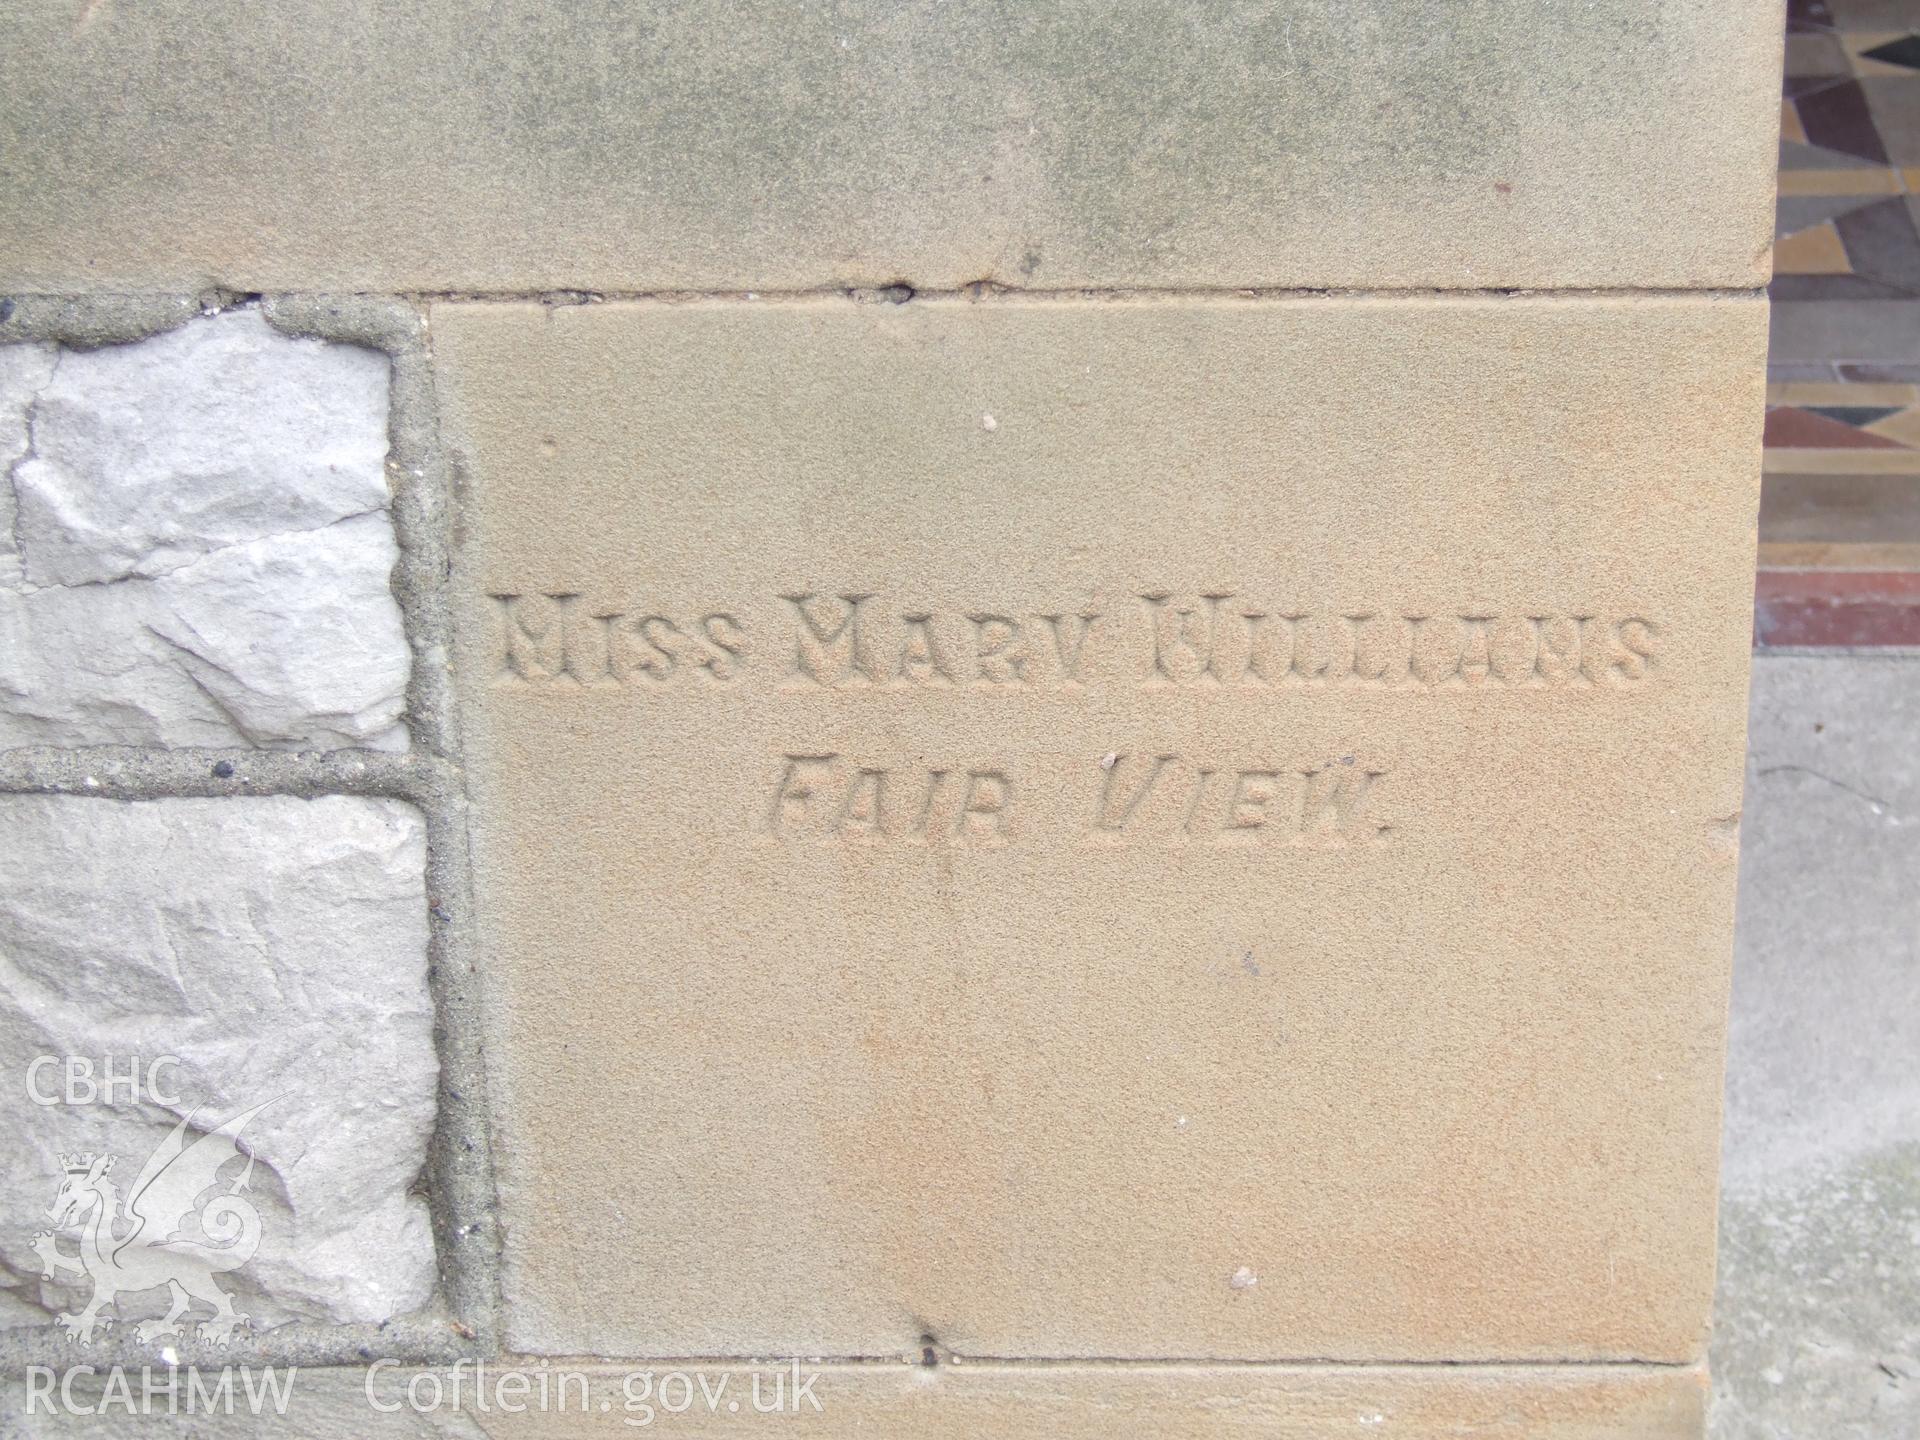 Miss Mary Williams, Fair View, foundation stone left of doors.